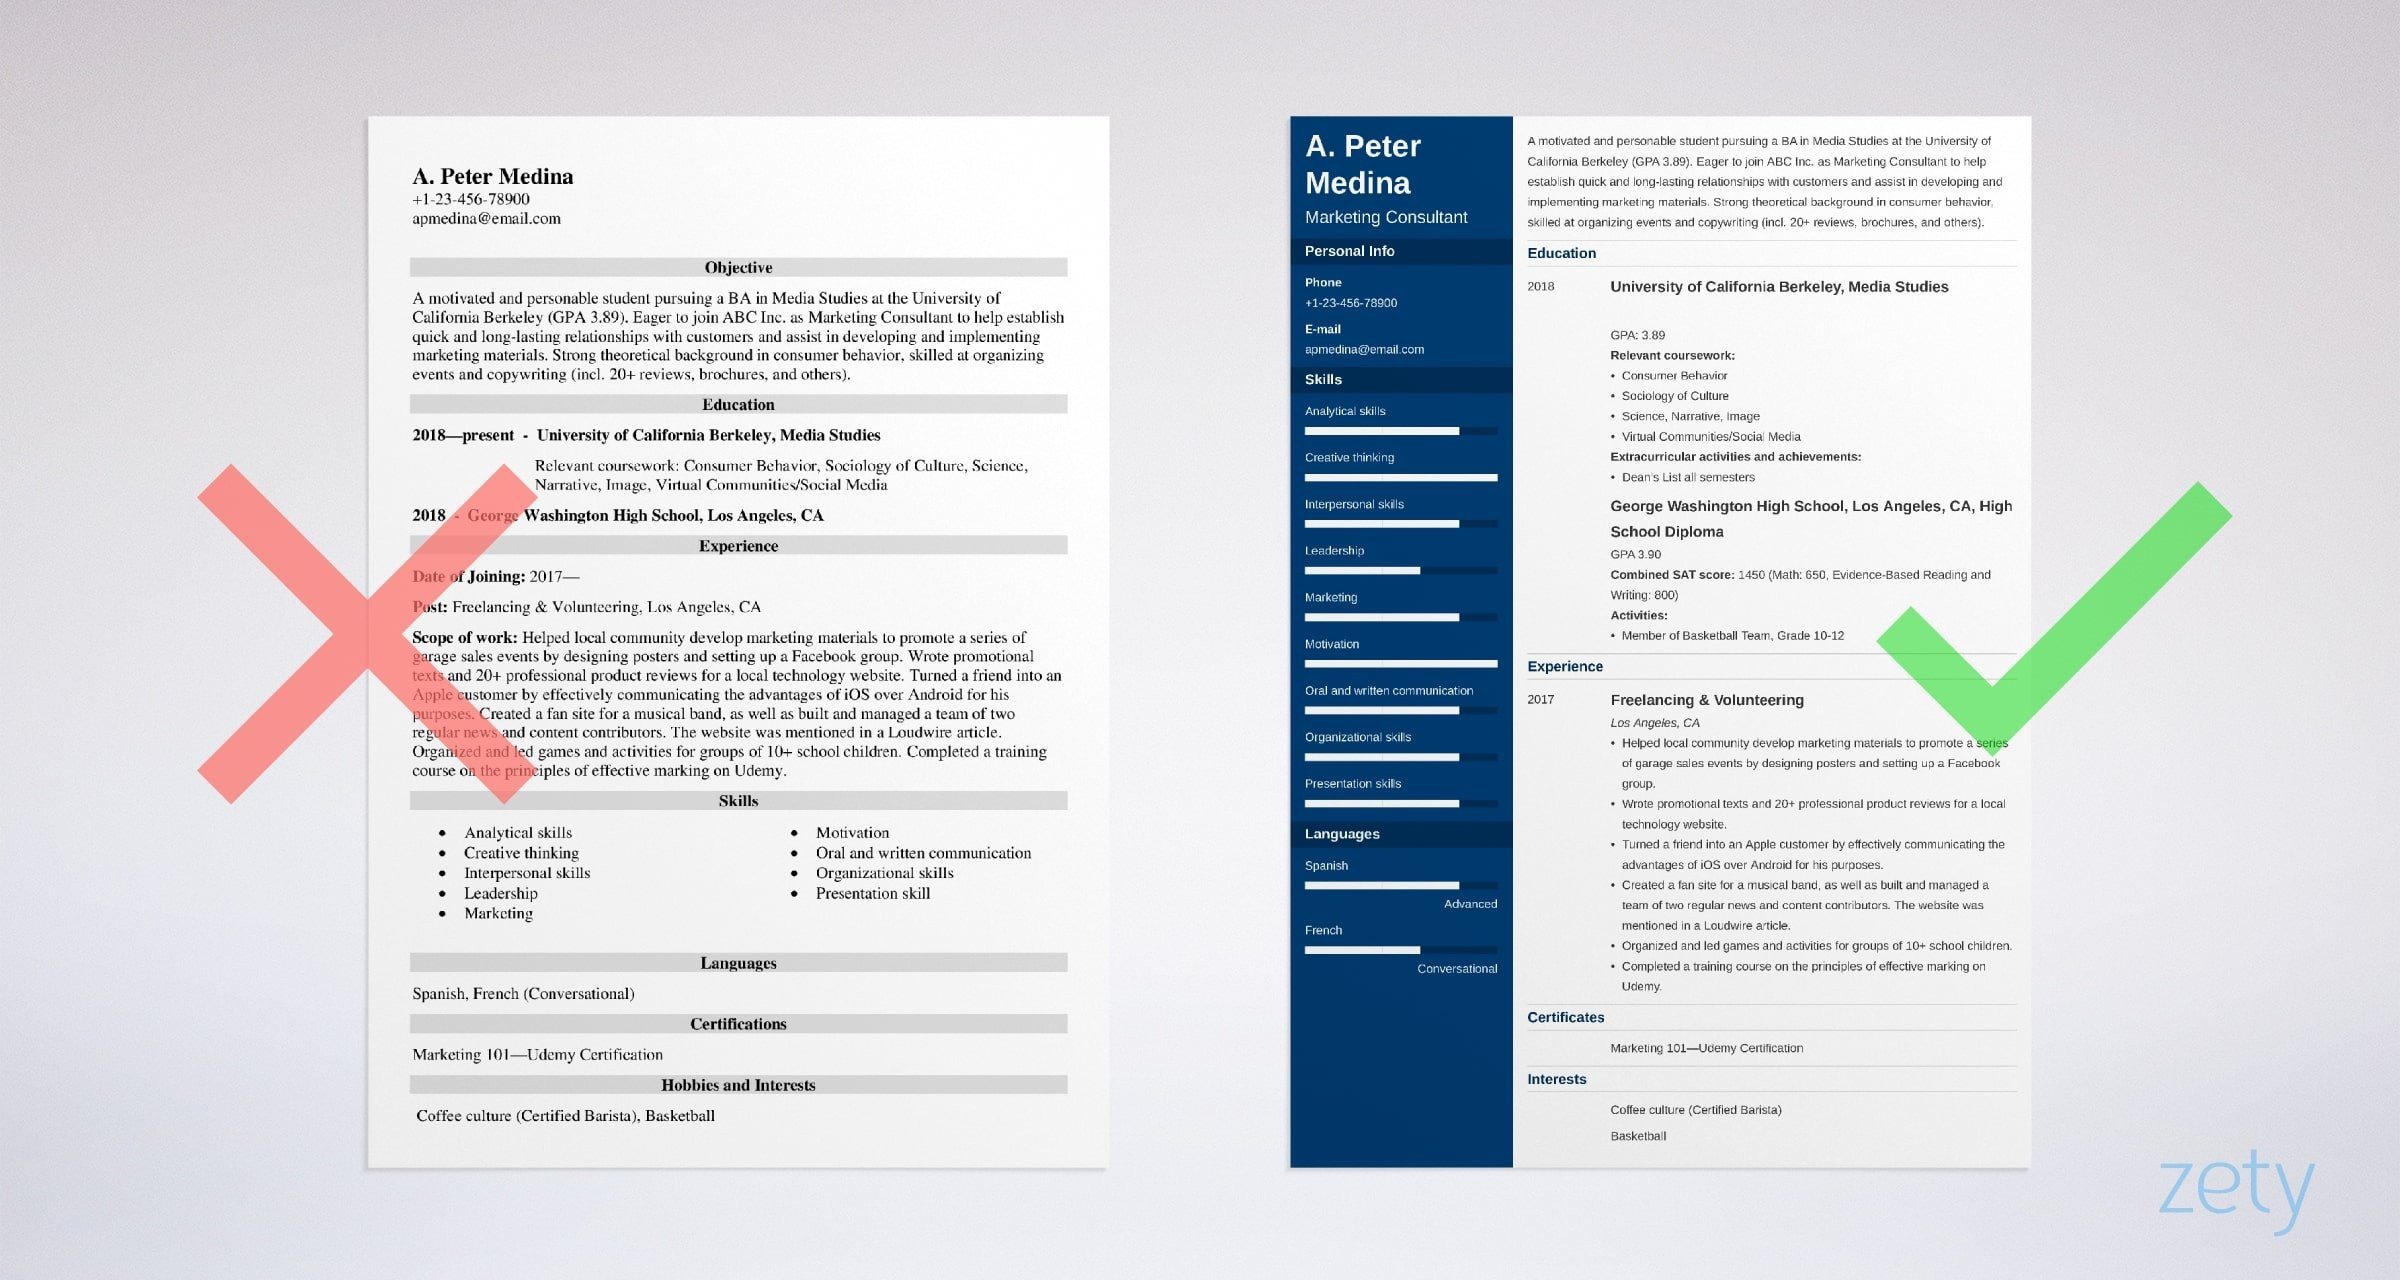 Resume Samples Highlight Skills Not Experience or School How to Make A Resume with No Experience: First Job Examples